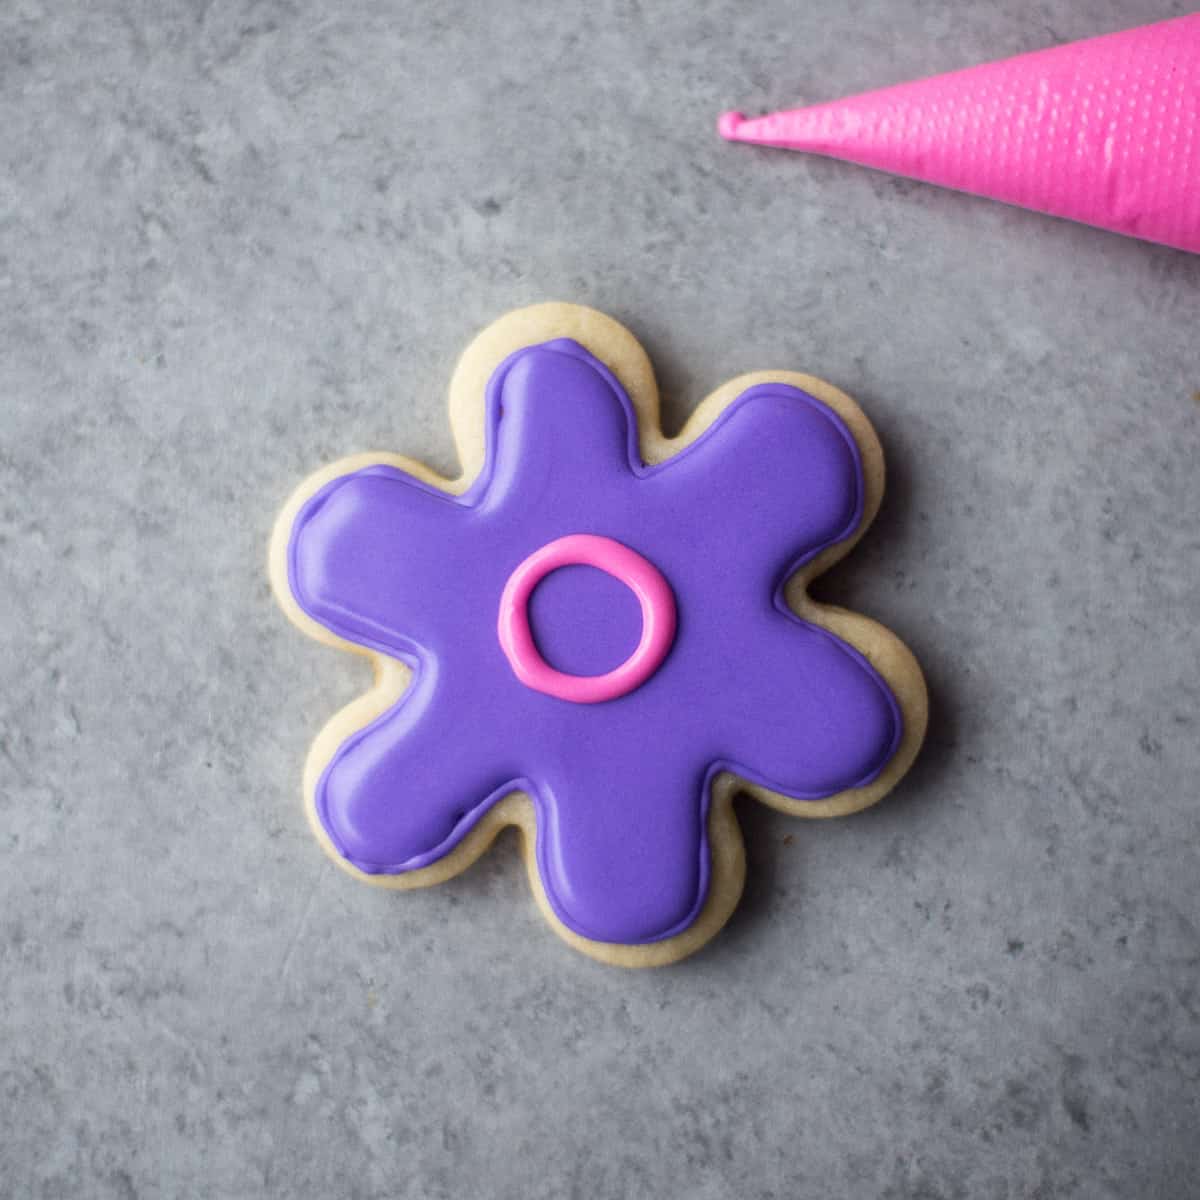 icing a flower shaped sugar cookie